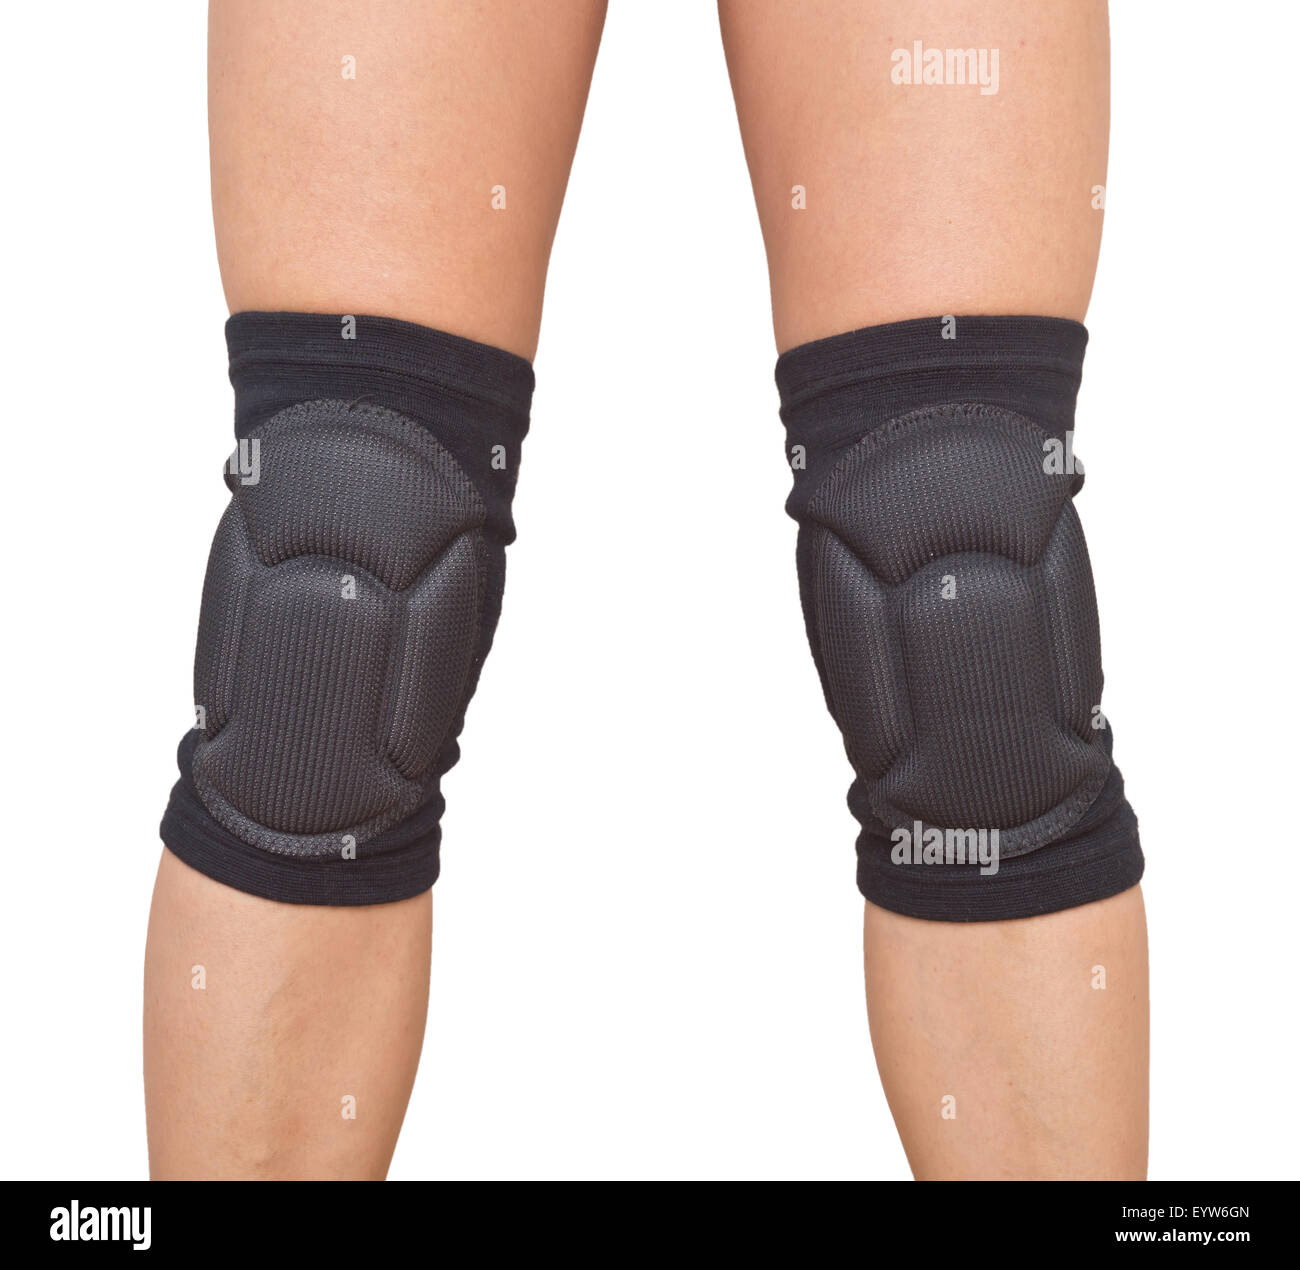 https://c8.alamy.com/comp/EYW6GN/woman-legs-with-knee-cap-pad-protector-isolated-on-white-background-EYW6GN.jpg